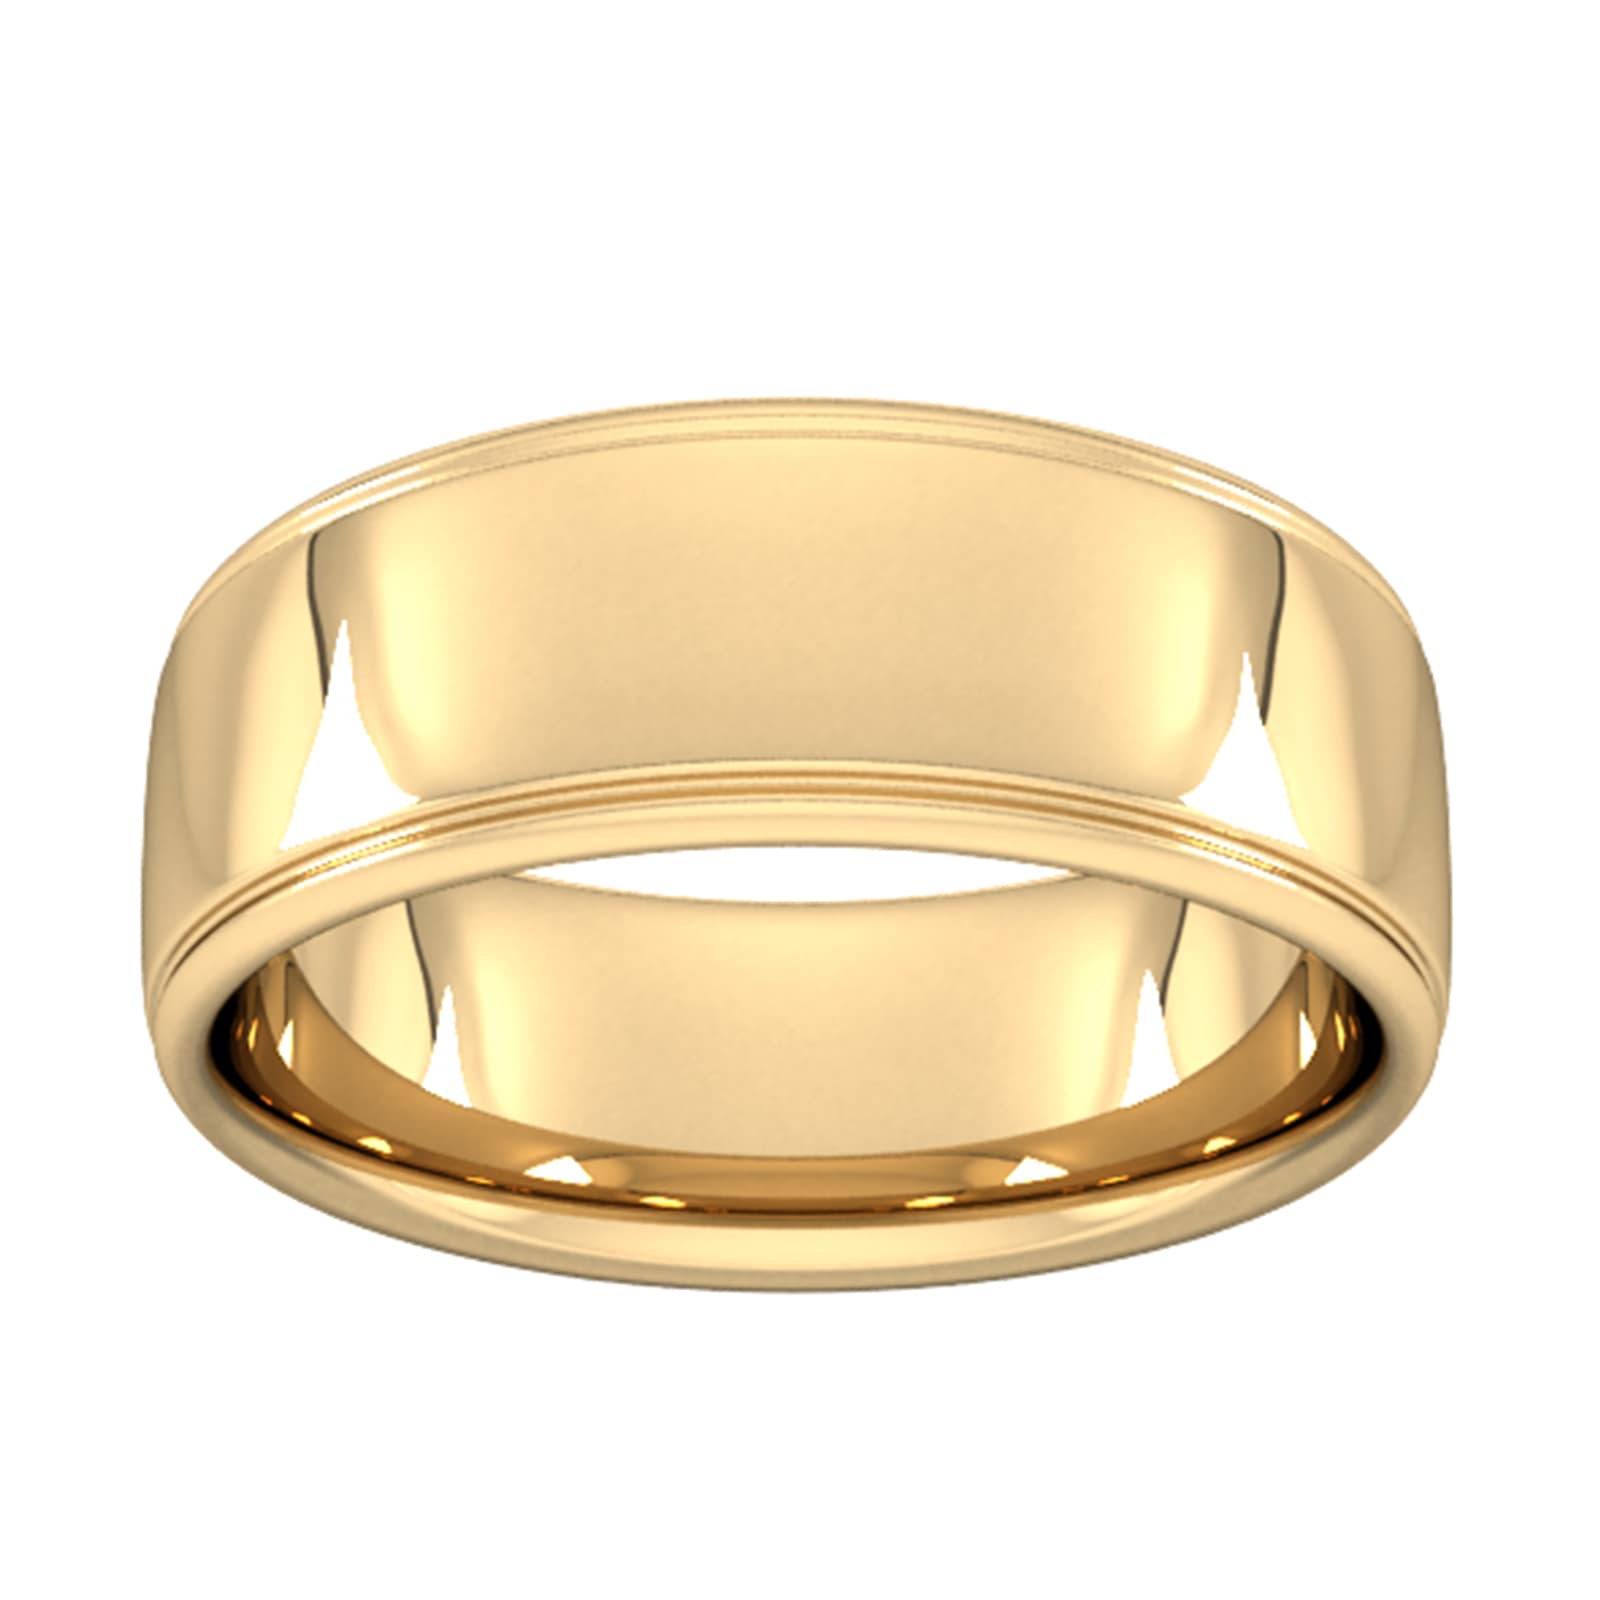 8mm Slight Court Standard Polished Finish With Grooves Wedding Ring In 18 Carat Yellow Gold - Ring Size S